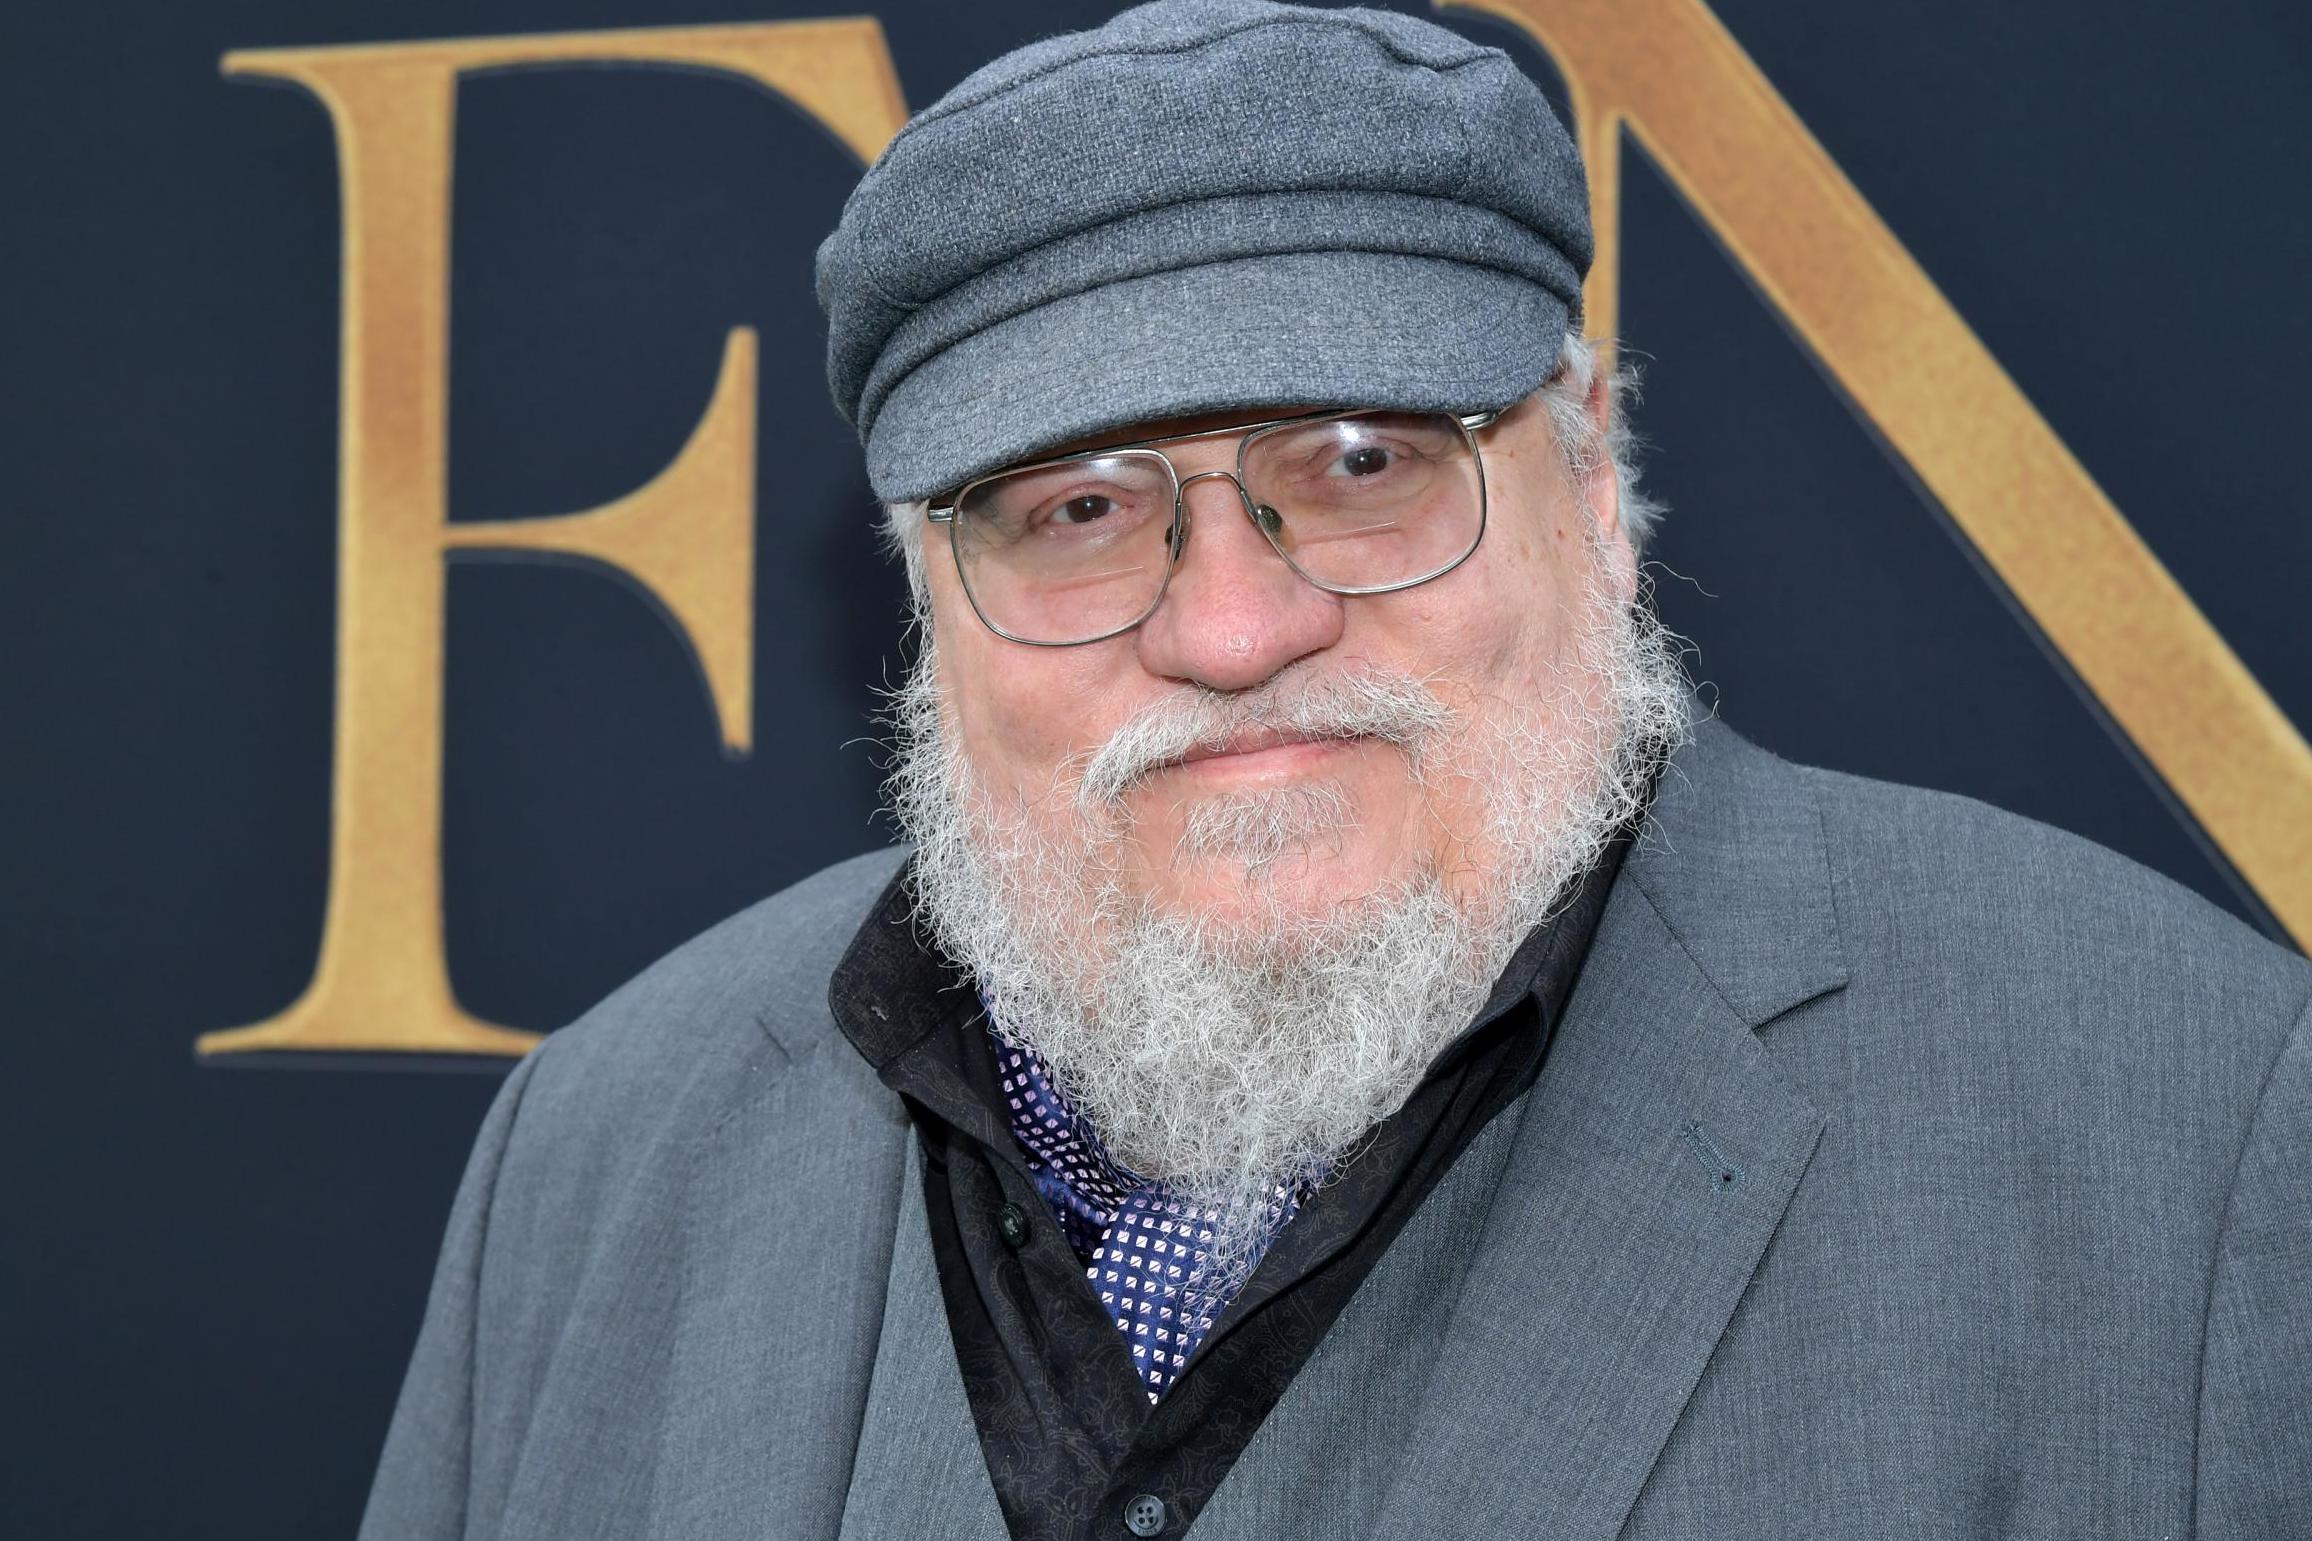 George RR Martin attends the LA Special Screening of 'Tolkien' at Regency Village Theatre on 8 May, 2019 in Westwood, California.